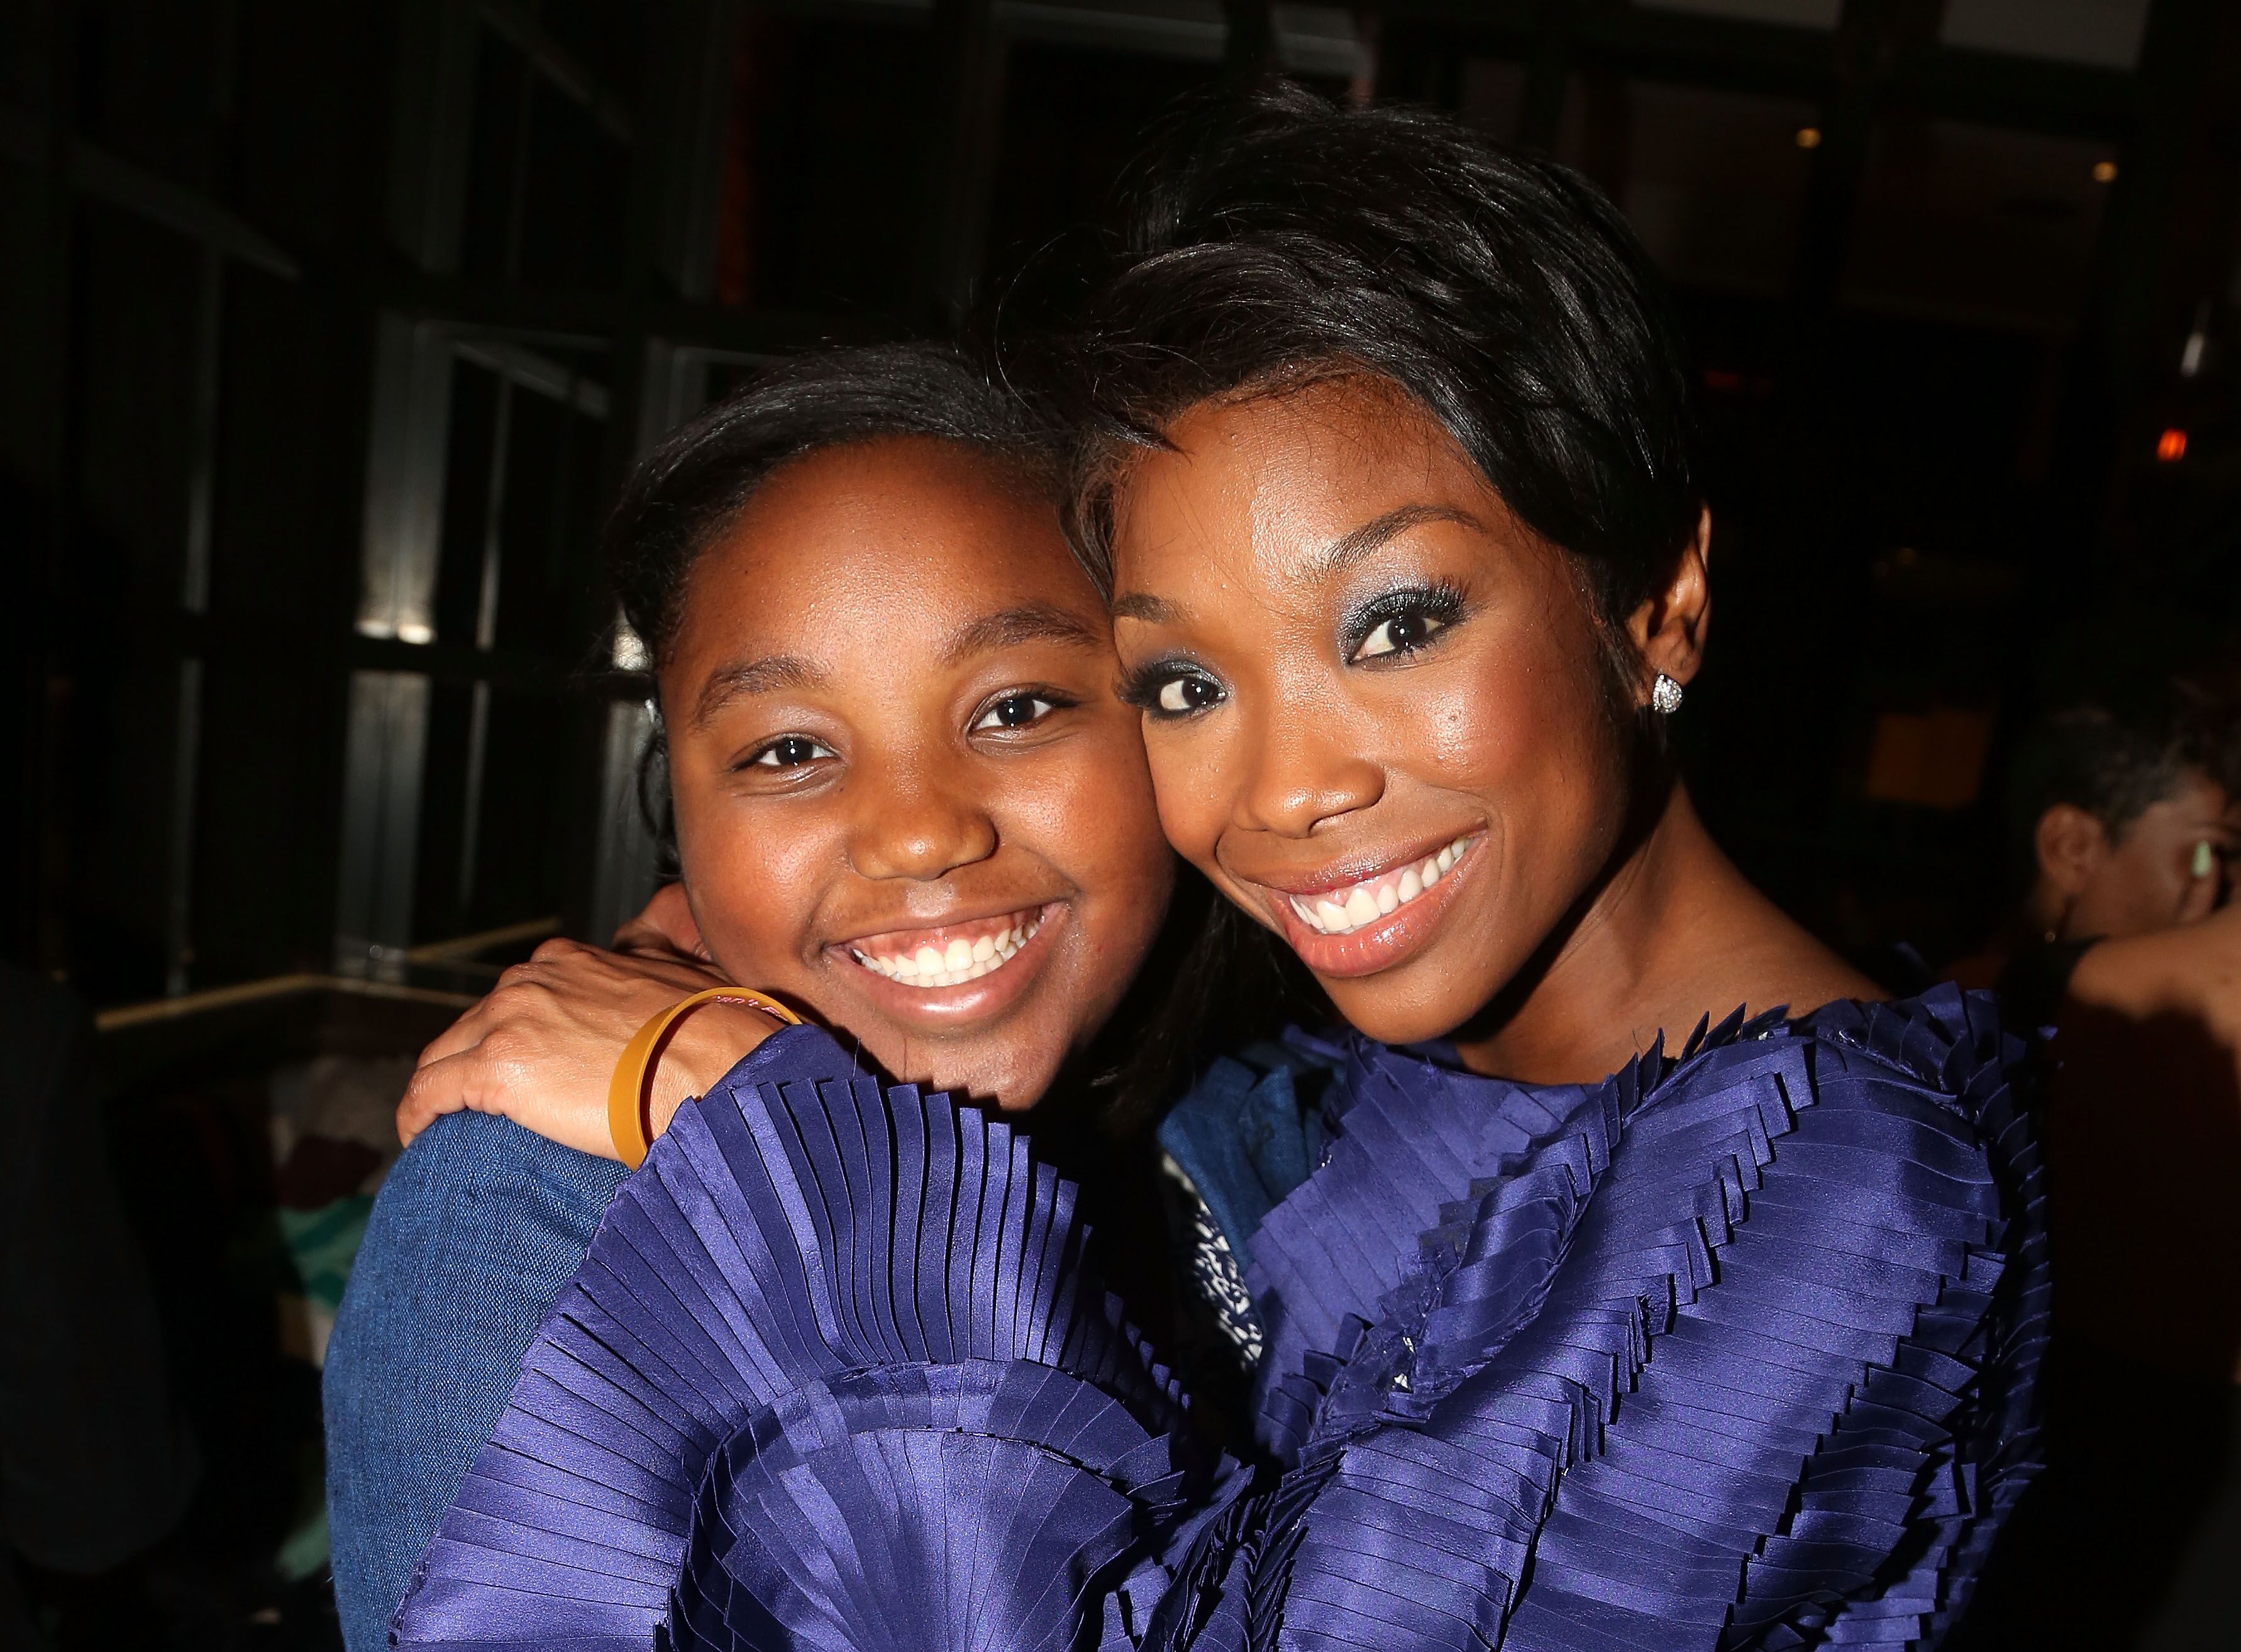 Sy'rai Iman Smith and mother Brandy Norwood at the opening night after party for Brandy's debut in "Chicago" on Broadway in 2015 | Source: Getty Images